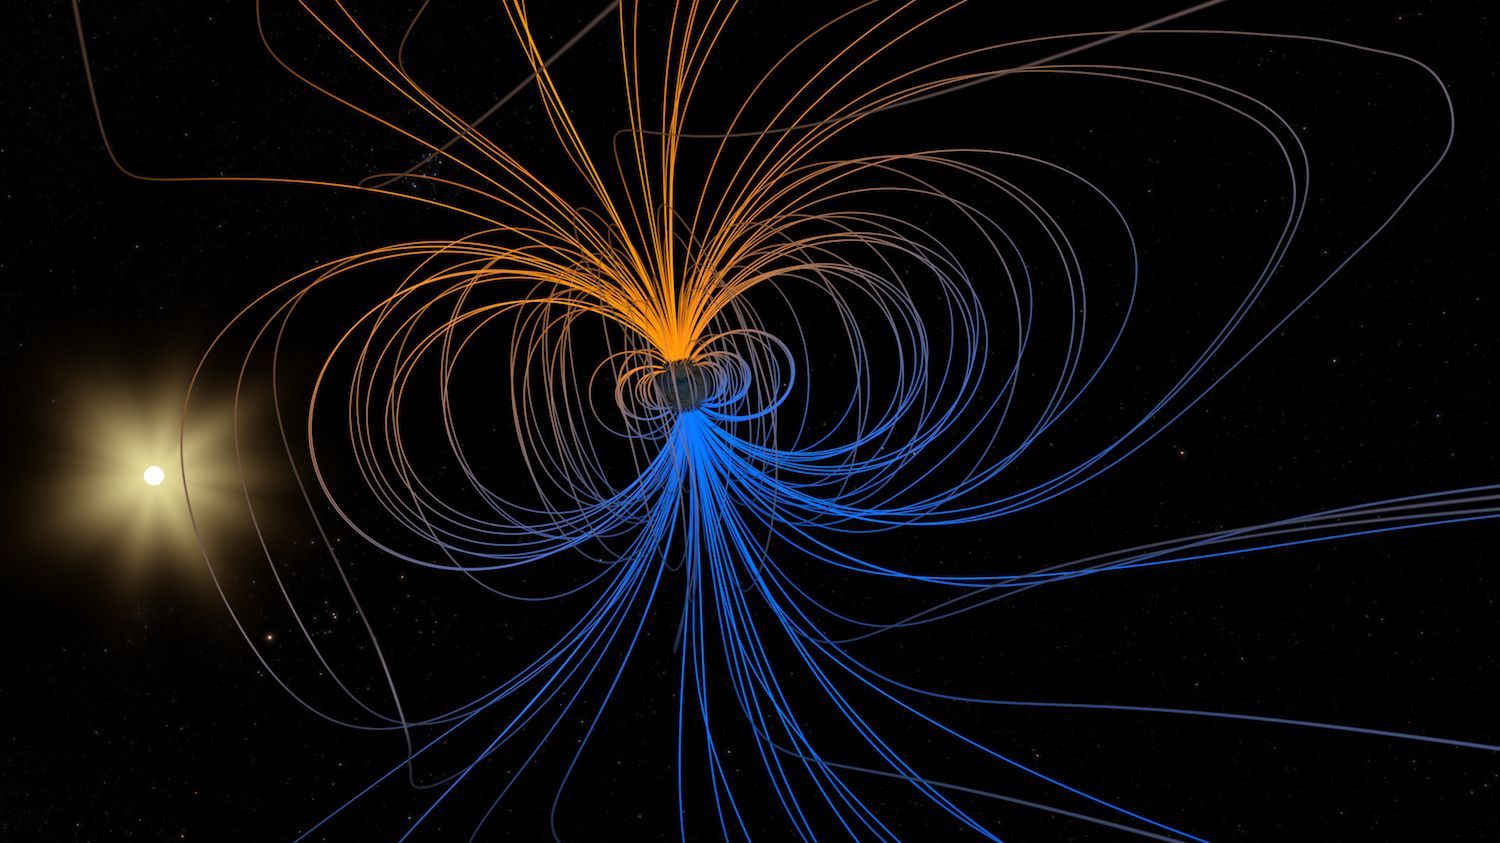 Earths magnetic field pulsed for two hours every two minutes